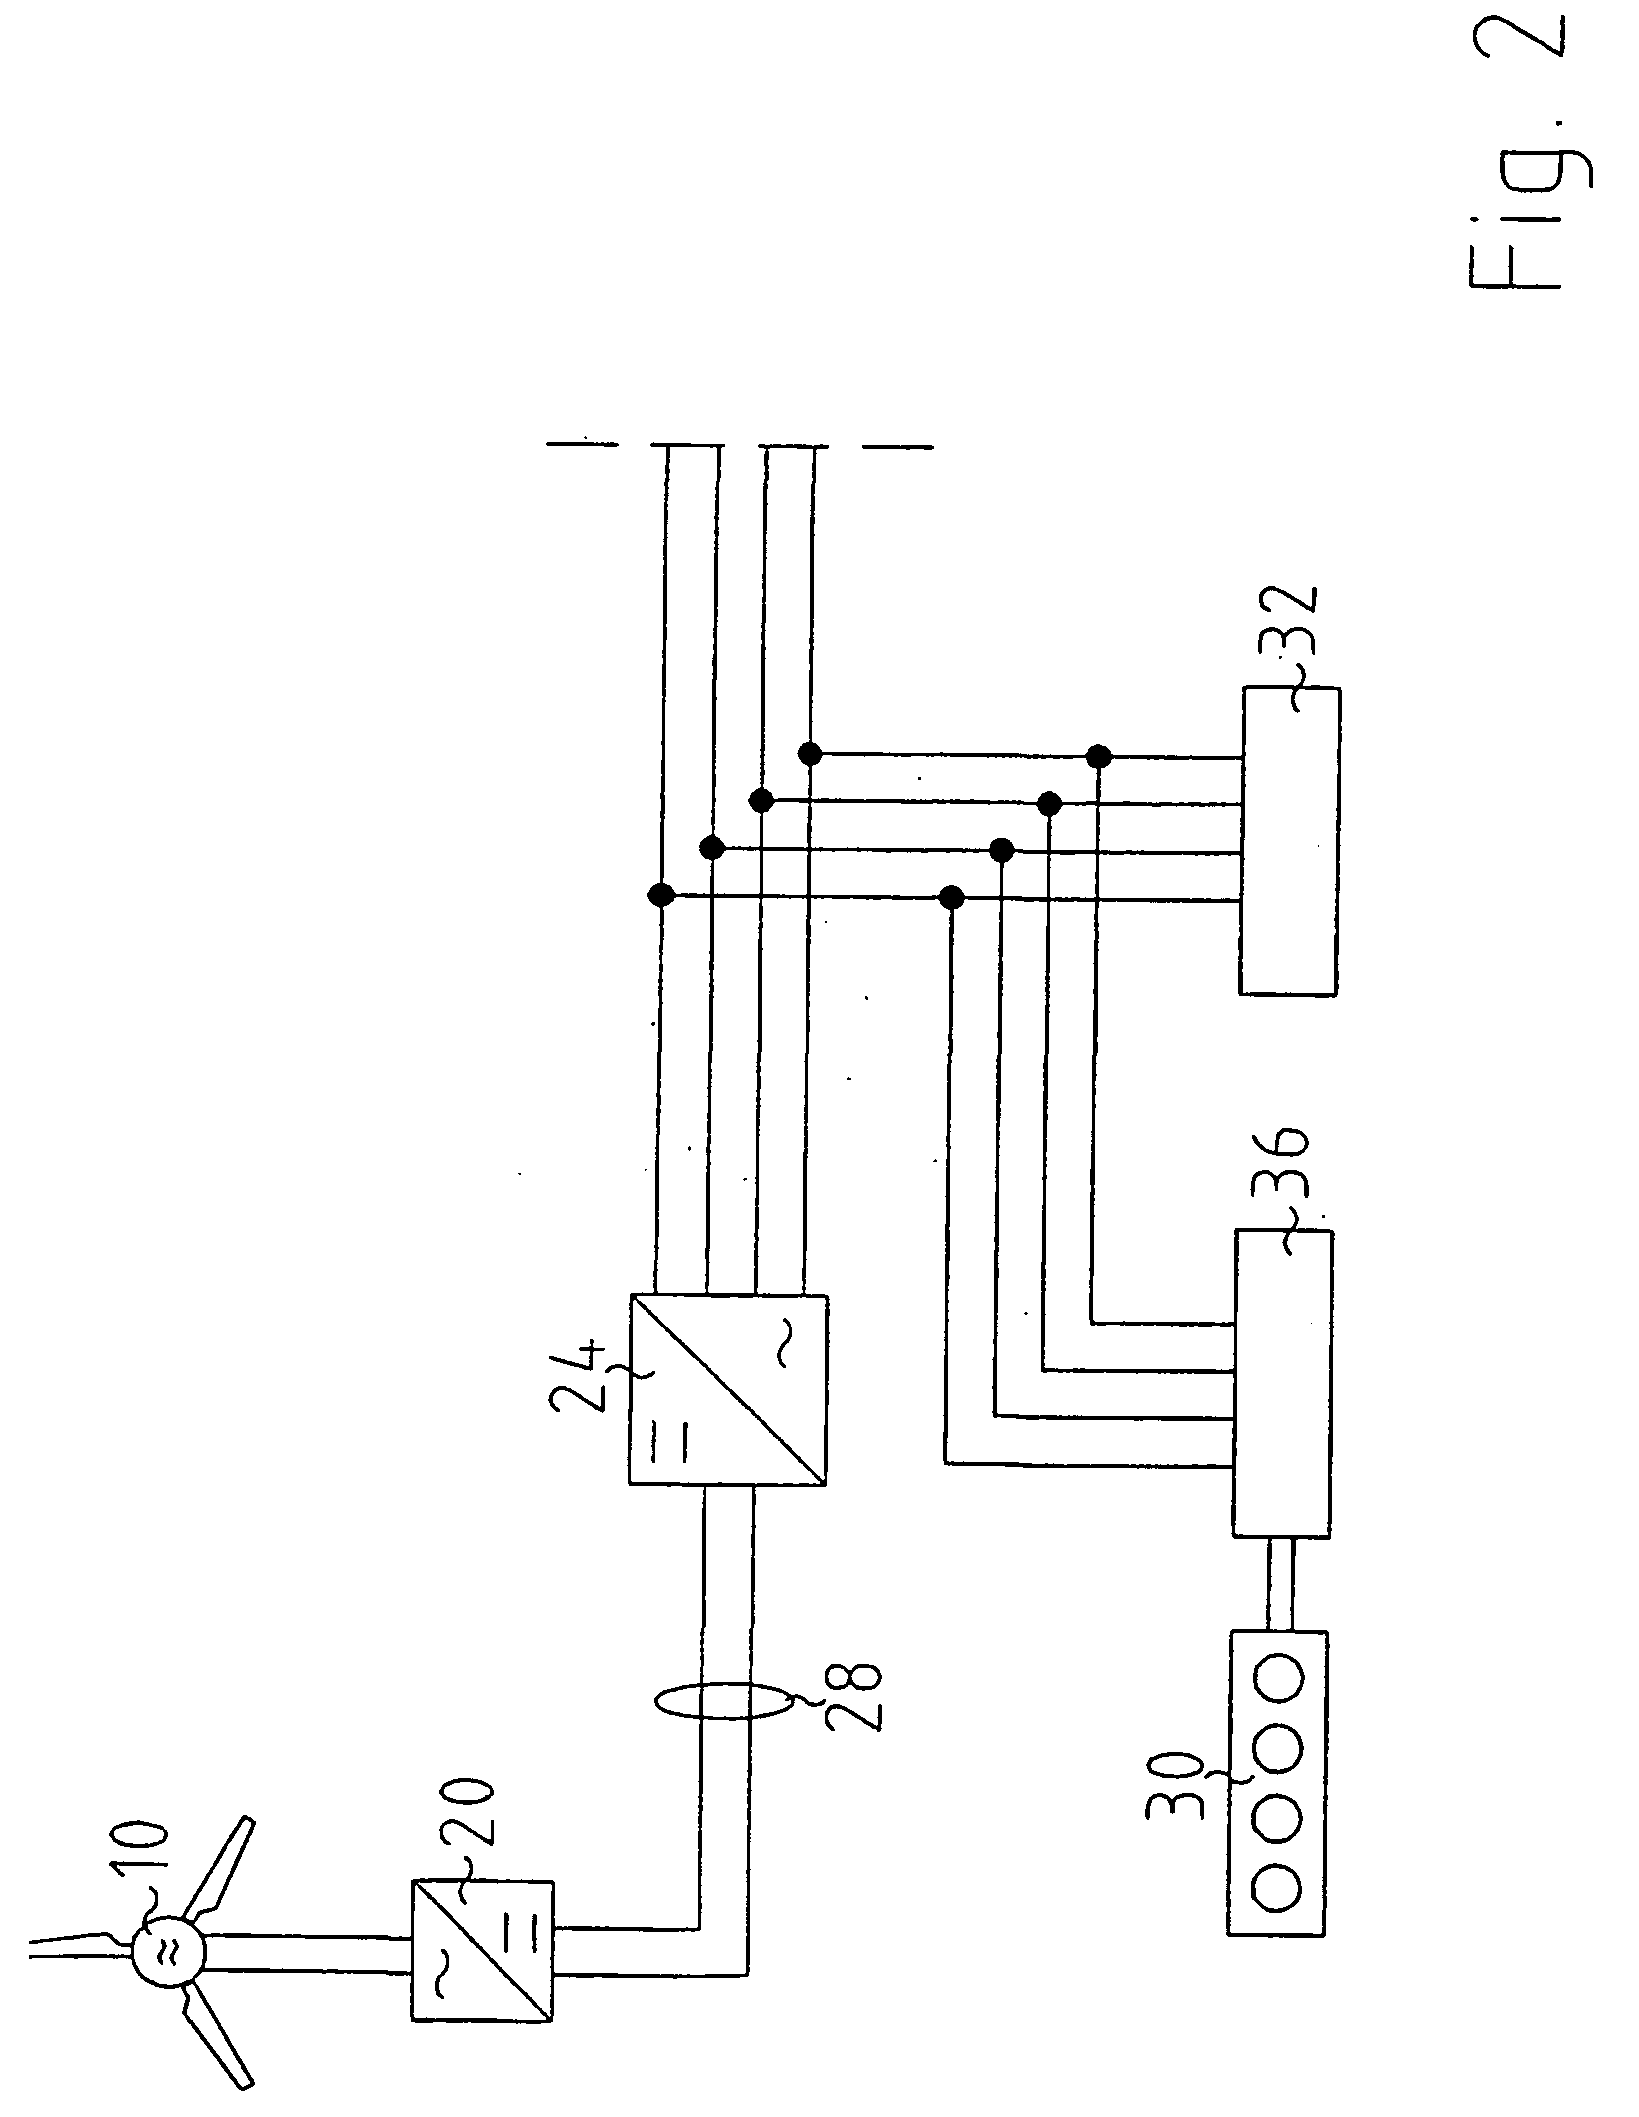 Island network and method for operation of an island network